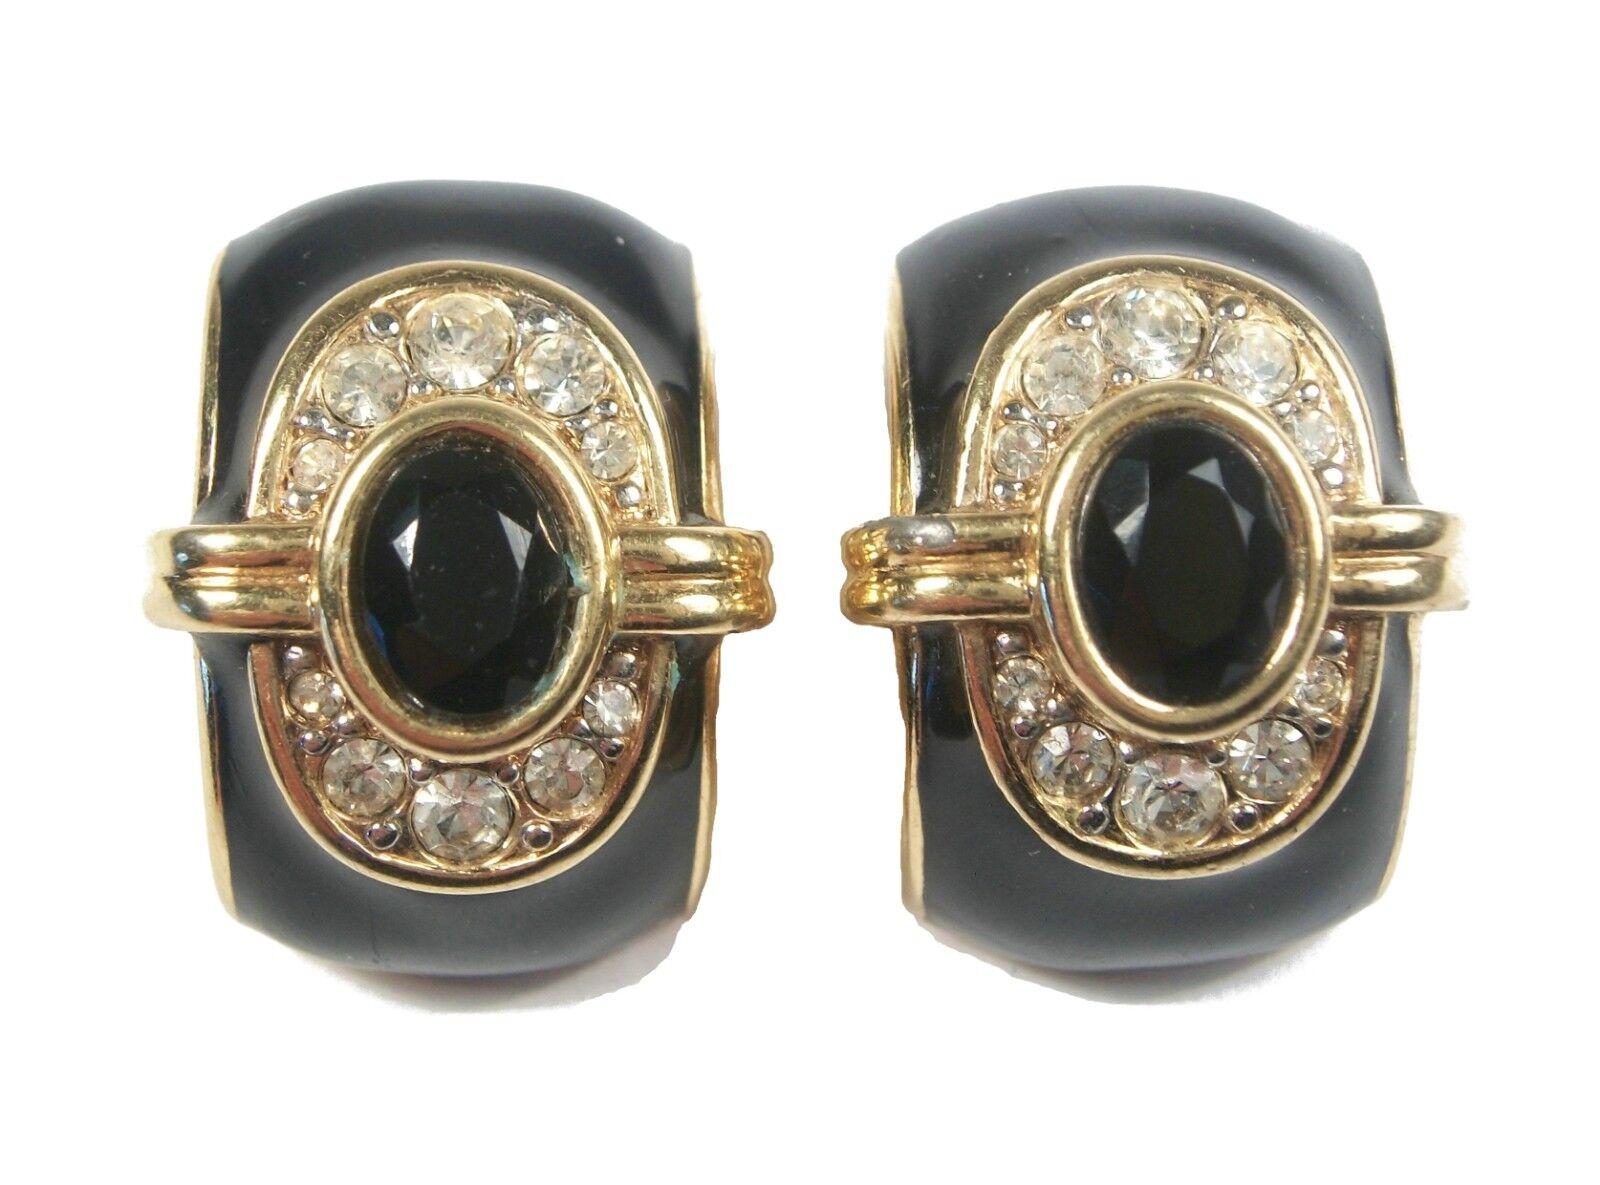 NINA RICCI - Vintage chunky clip on faux onyx and rhinestone earrings with black enamel - one clip back signed - © NINA RICCI - made in France - circa 1980's.

Good vintage condition - minor gilding loss/wear - one clip back replaced - minor scuffs